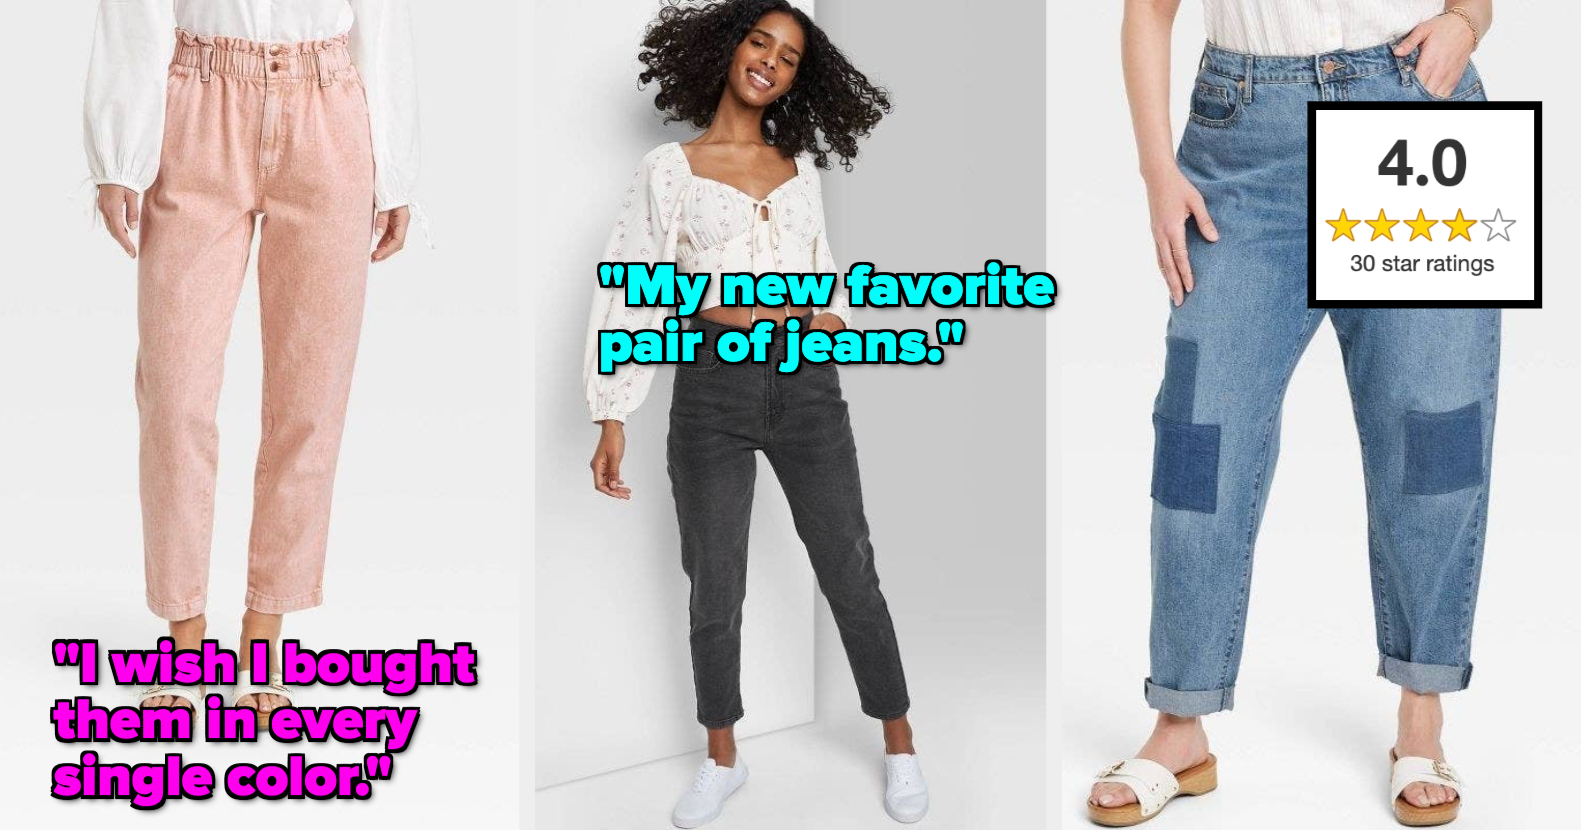 Millennials Don't Know What to Wear. Gen Z Has Thoughts. - The New